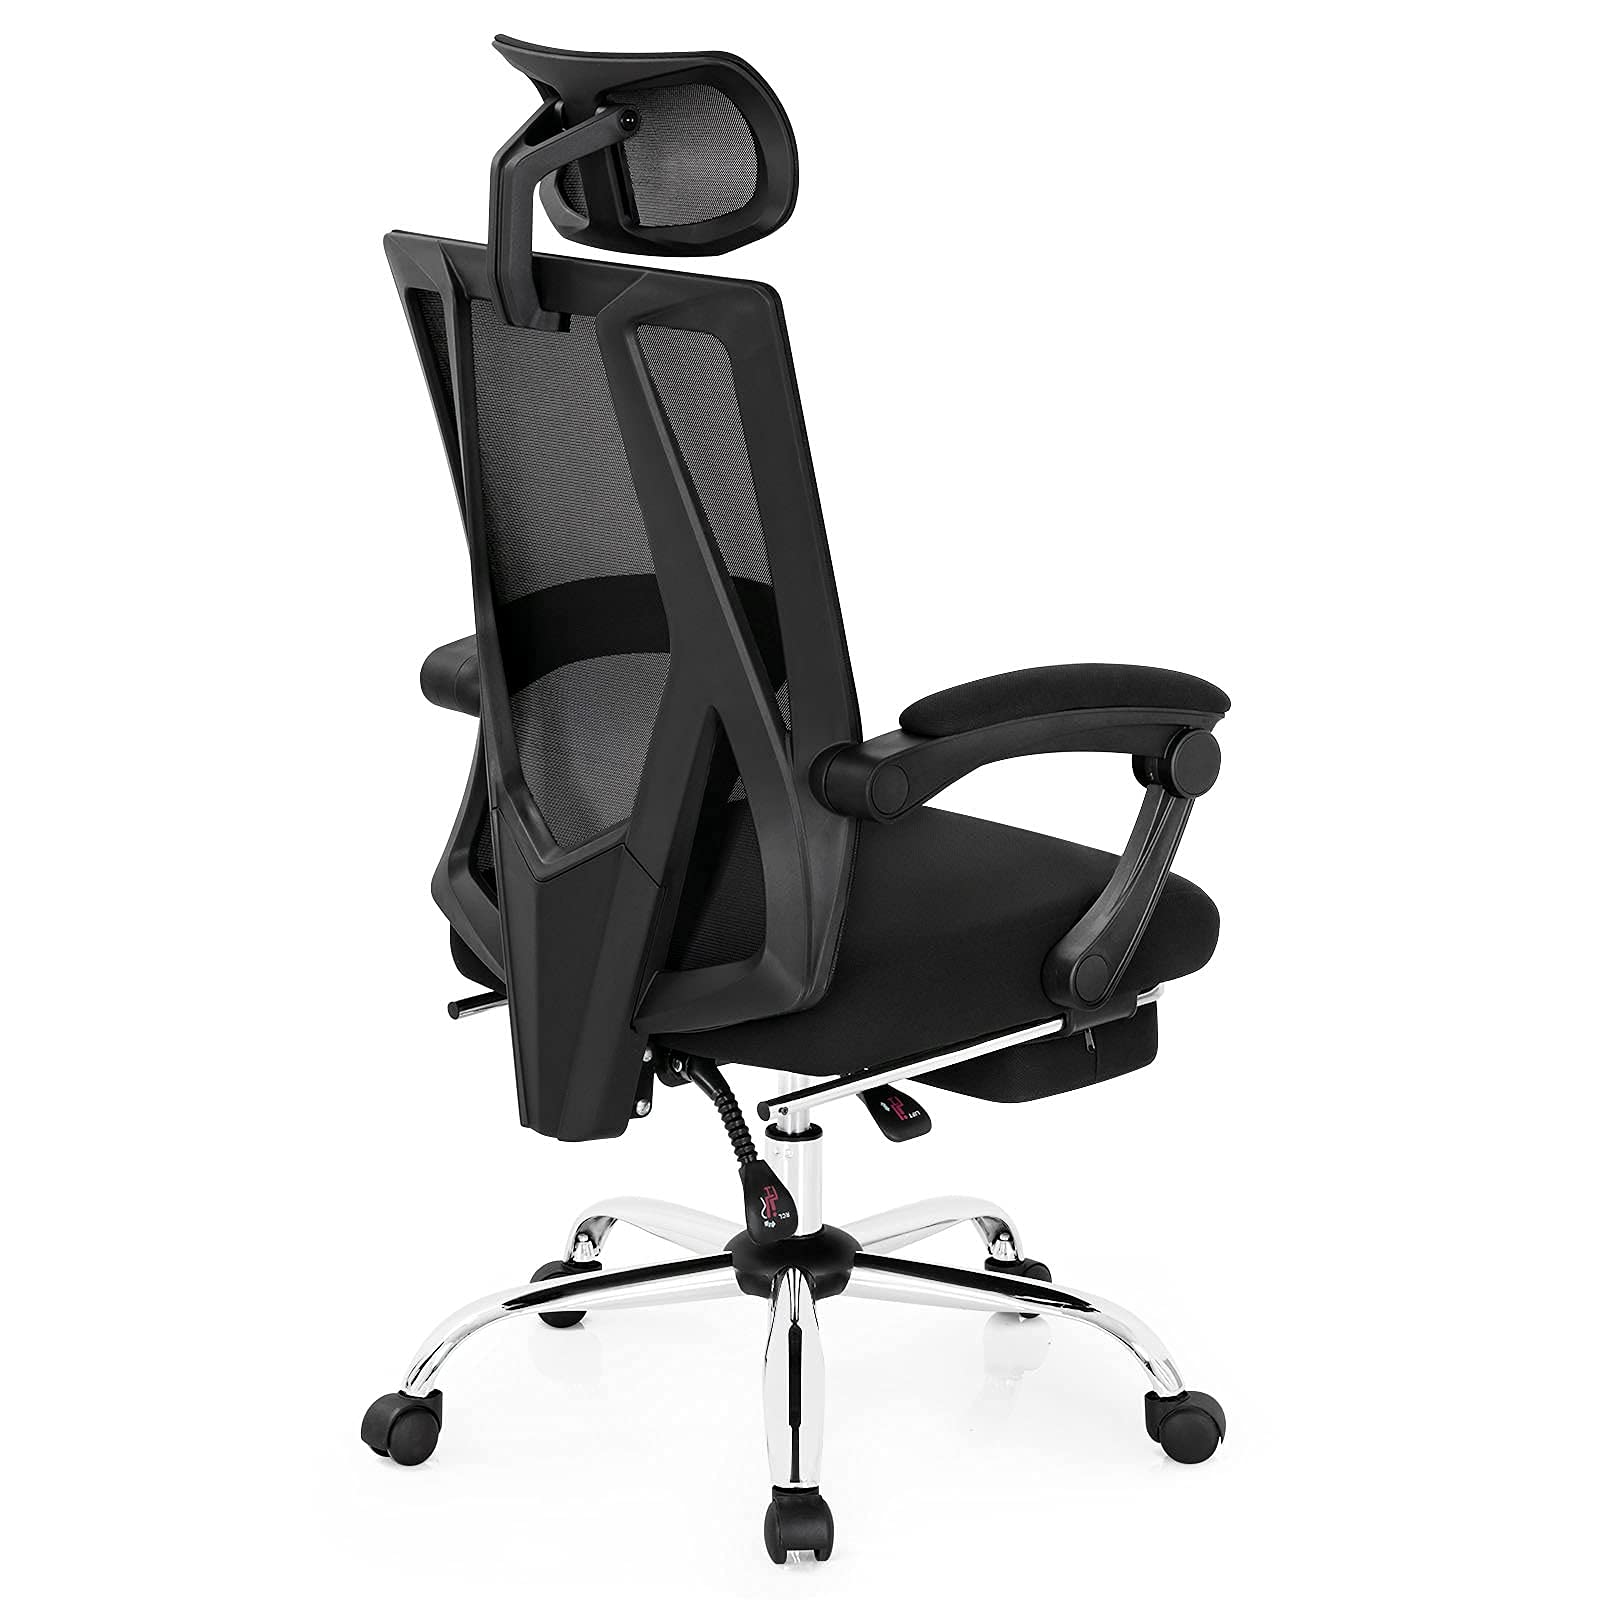 Giantex Swivel Rolling Executive Recliner Chair for Home Office Meeting Room